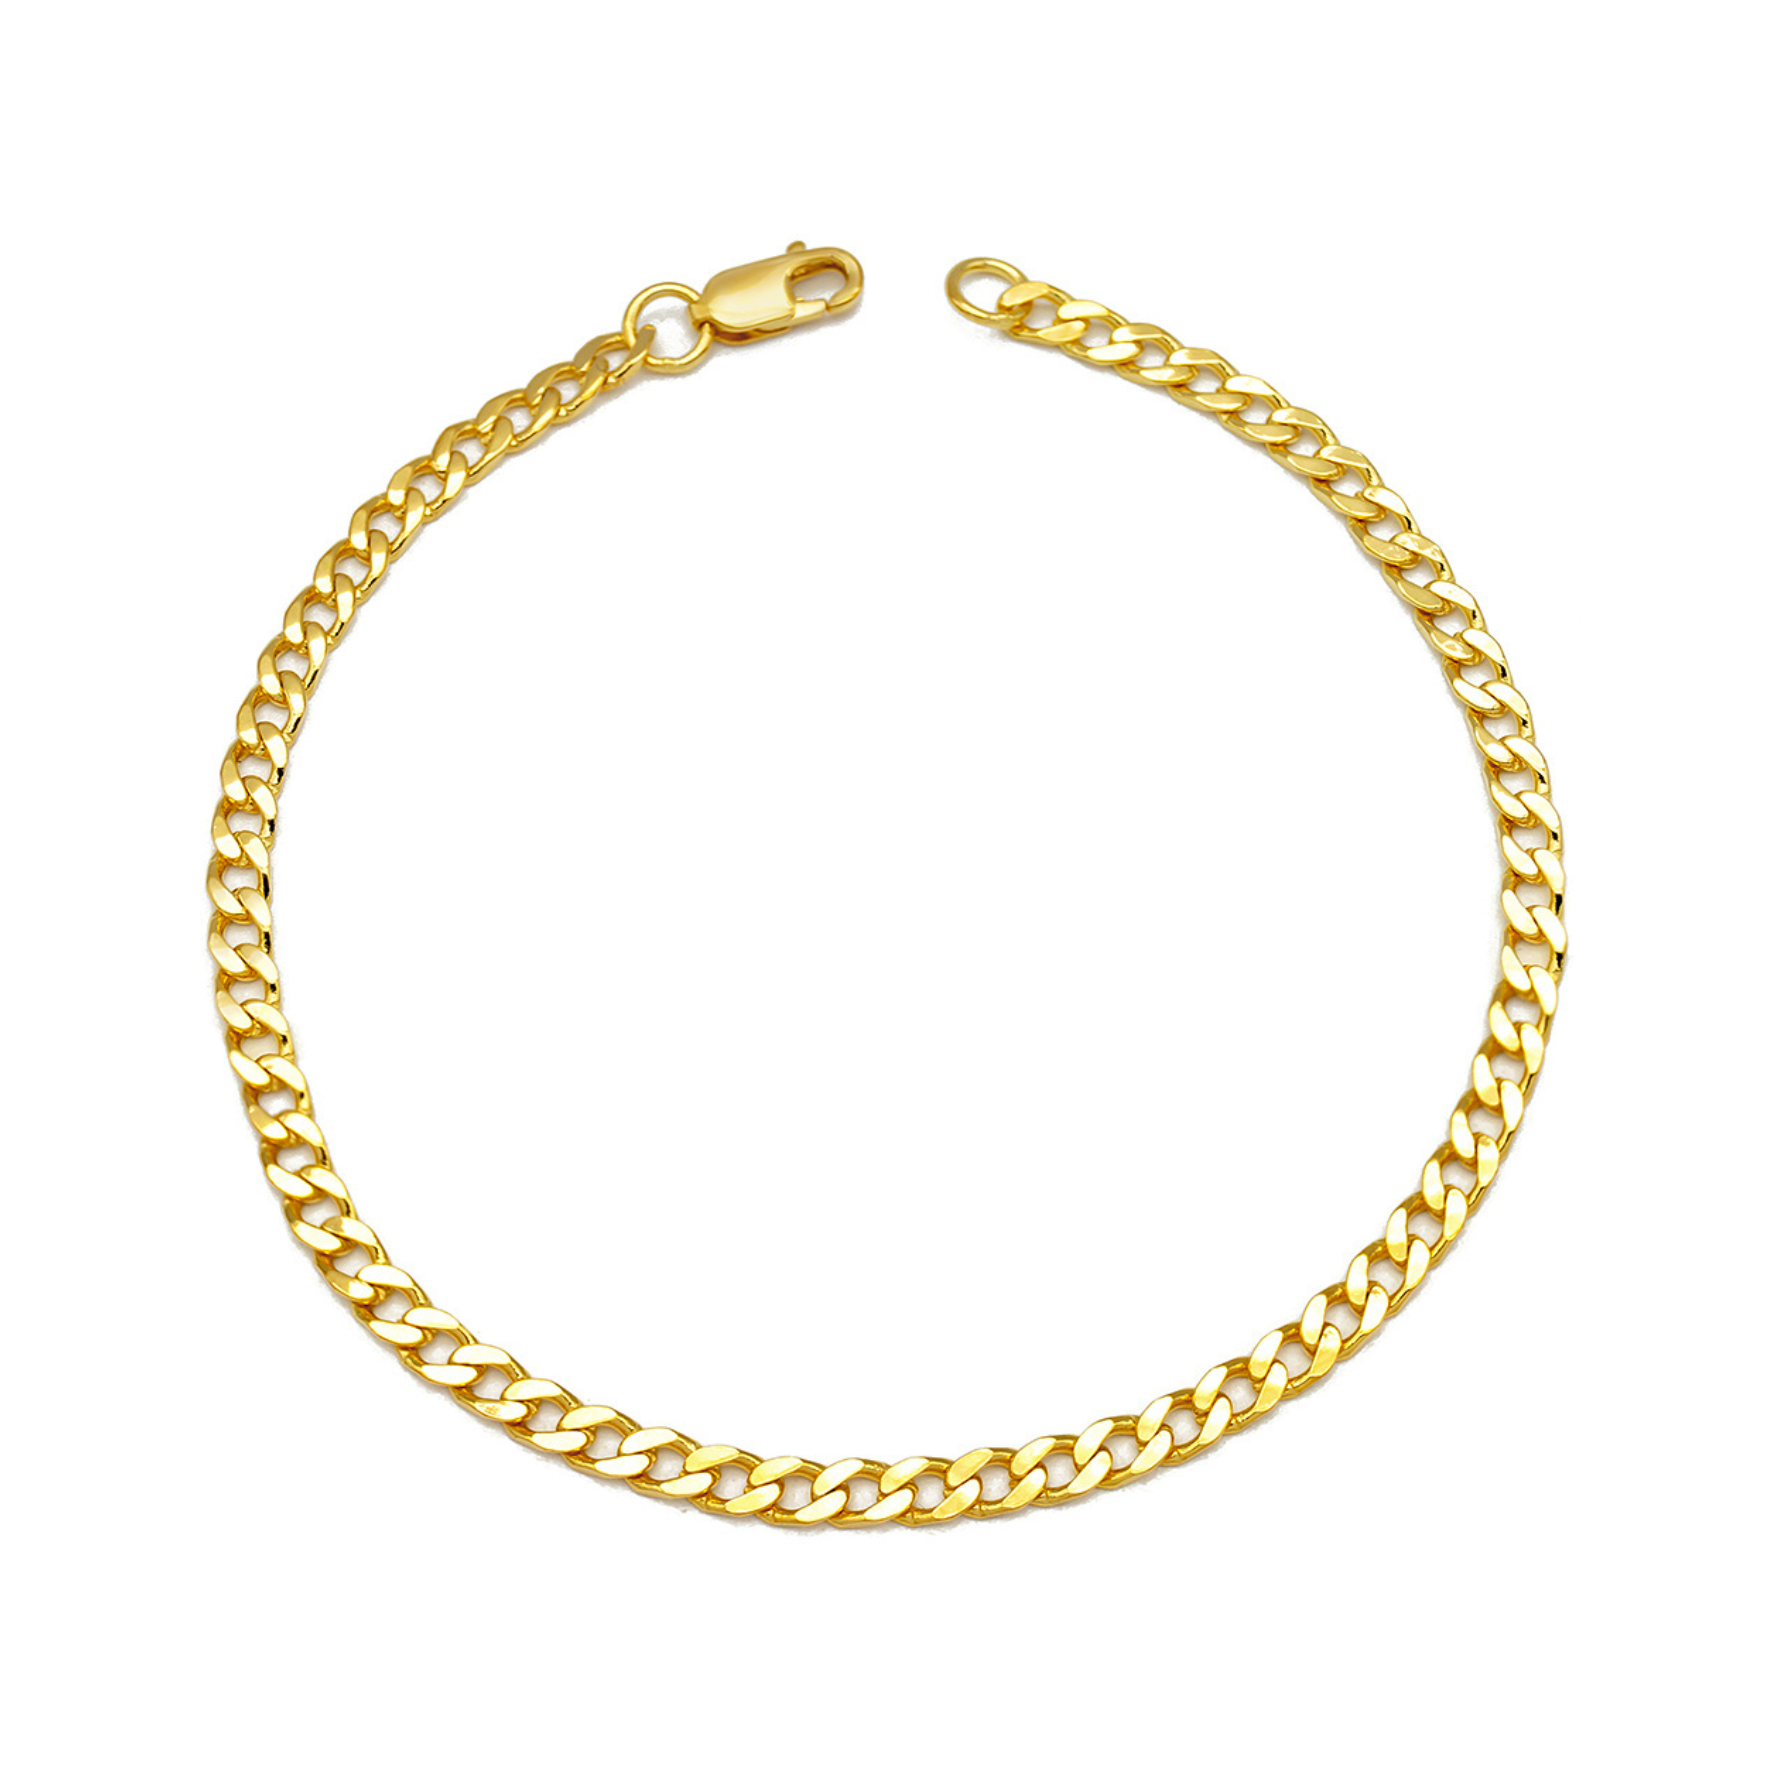 Line Panzer Bracelet from A-Hjort Jewellery in Goldplated Silver Sterling 925